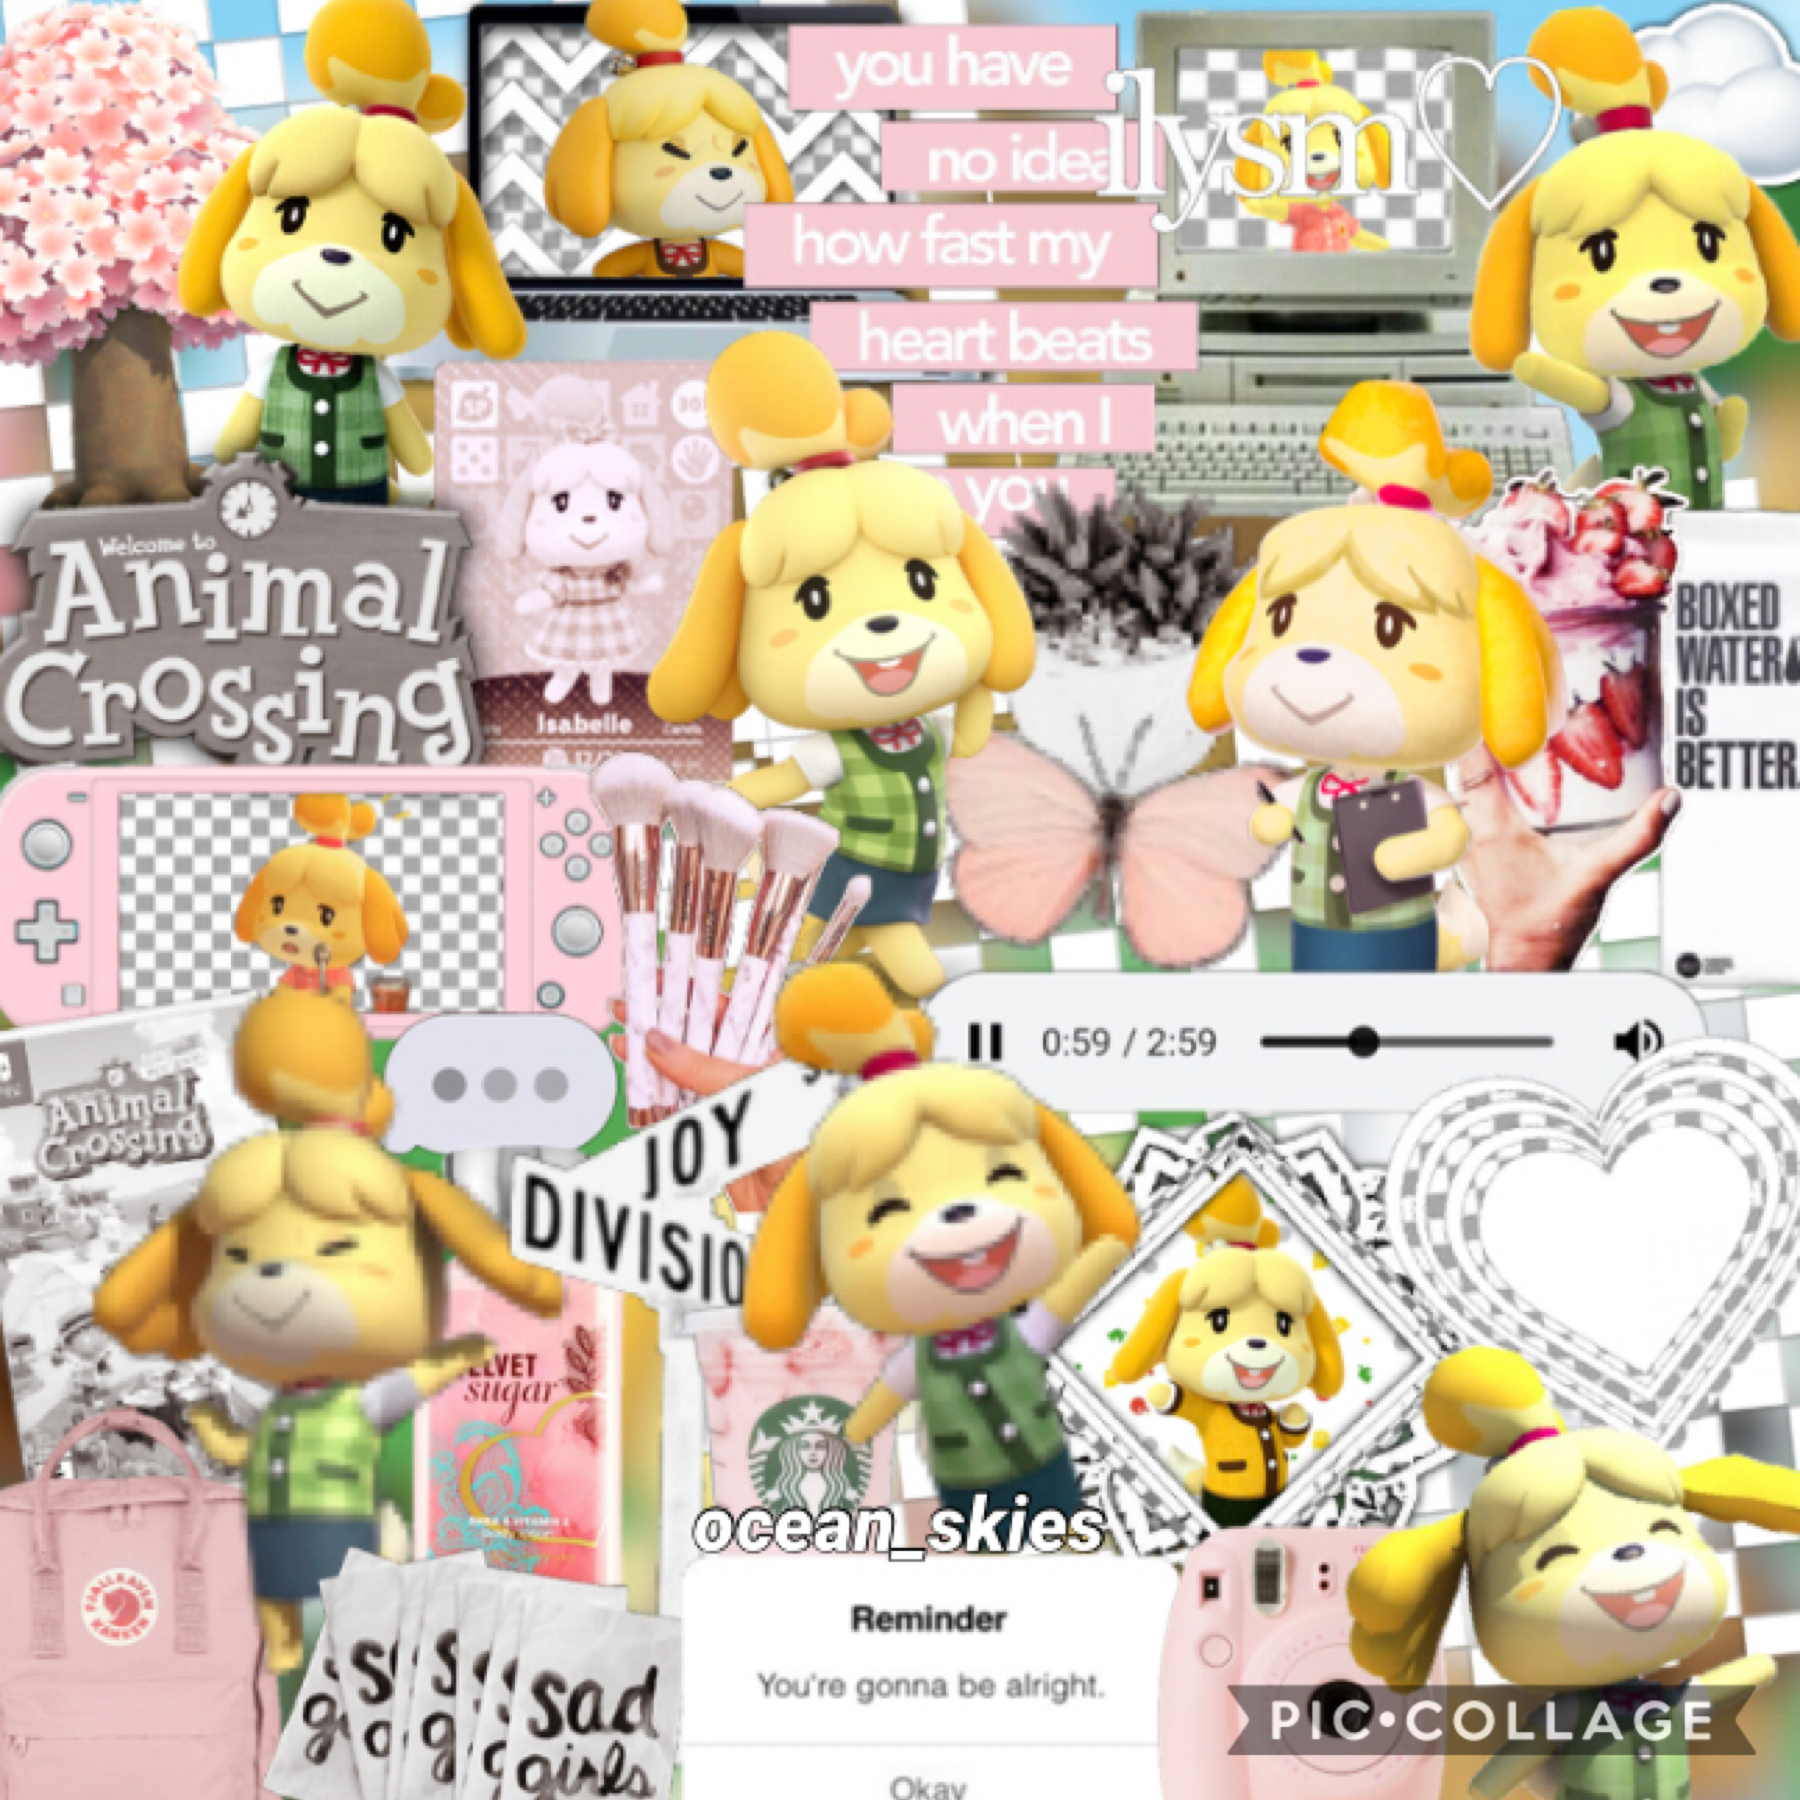 TAP
i was out looking for overlays on picsart and i found one that was a bunch of animal crossing characters and that inspired me to do this. didn’t wanna post it on my main so yeah. hope you like it hehe